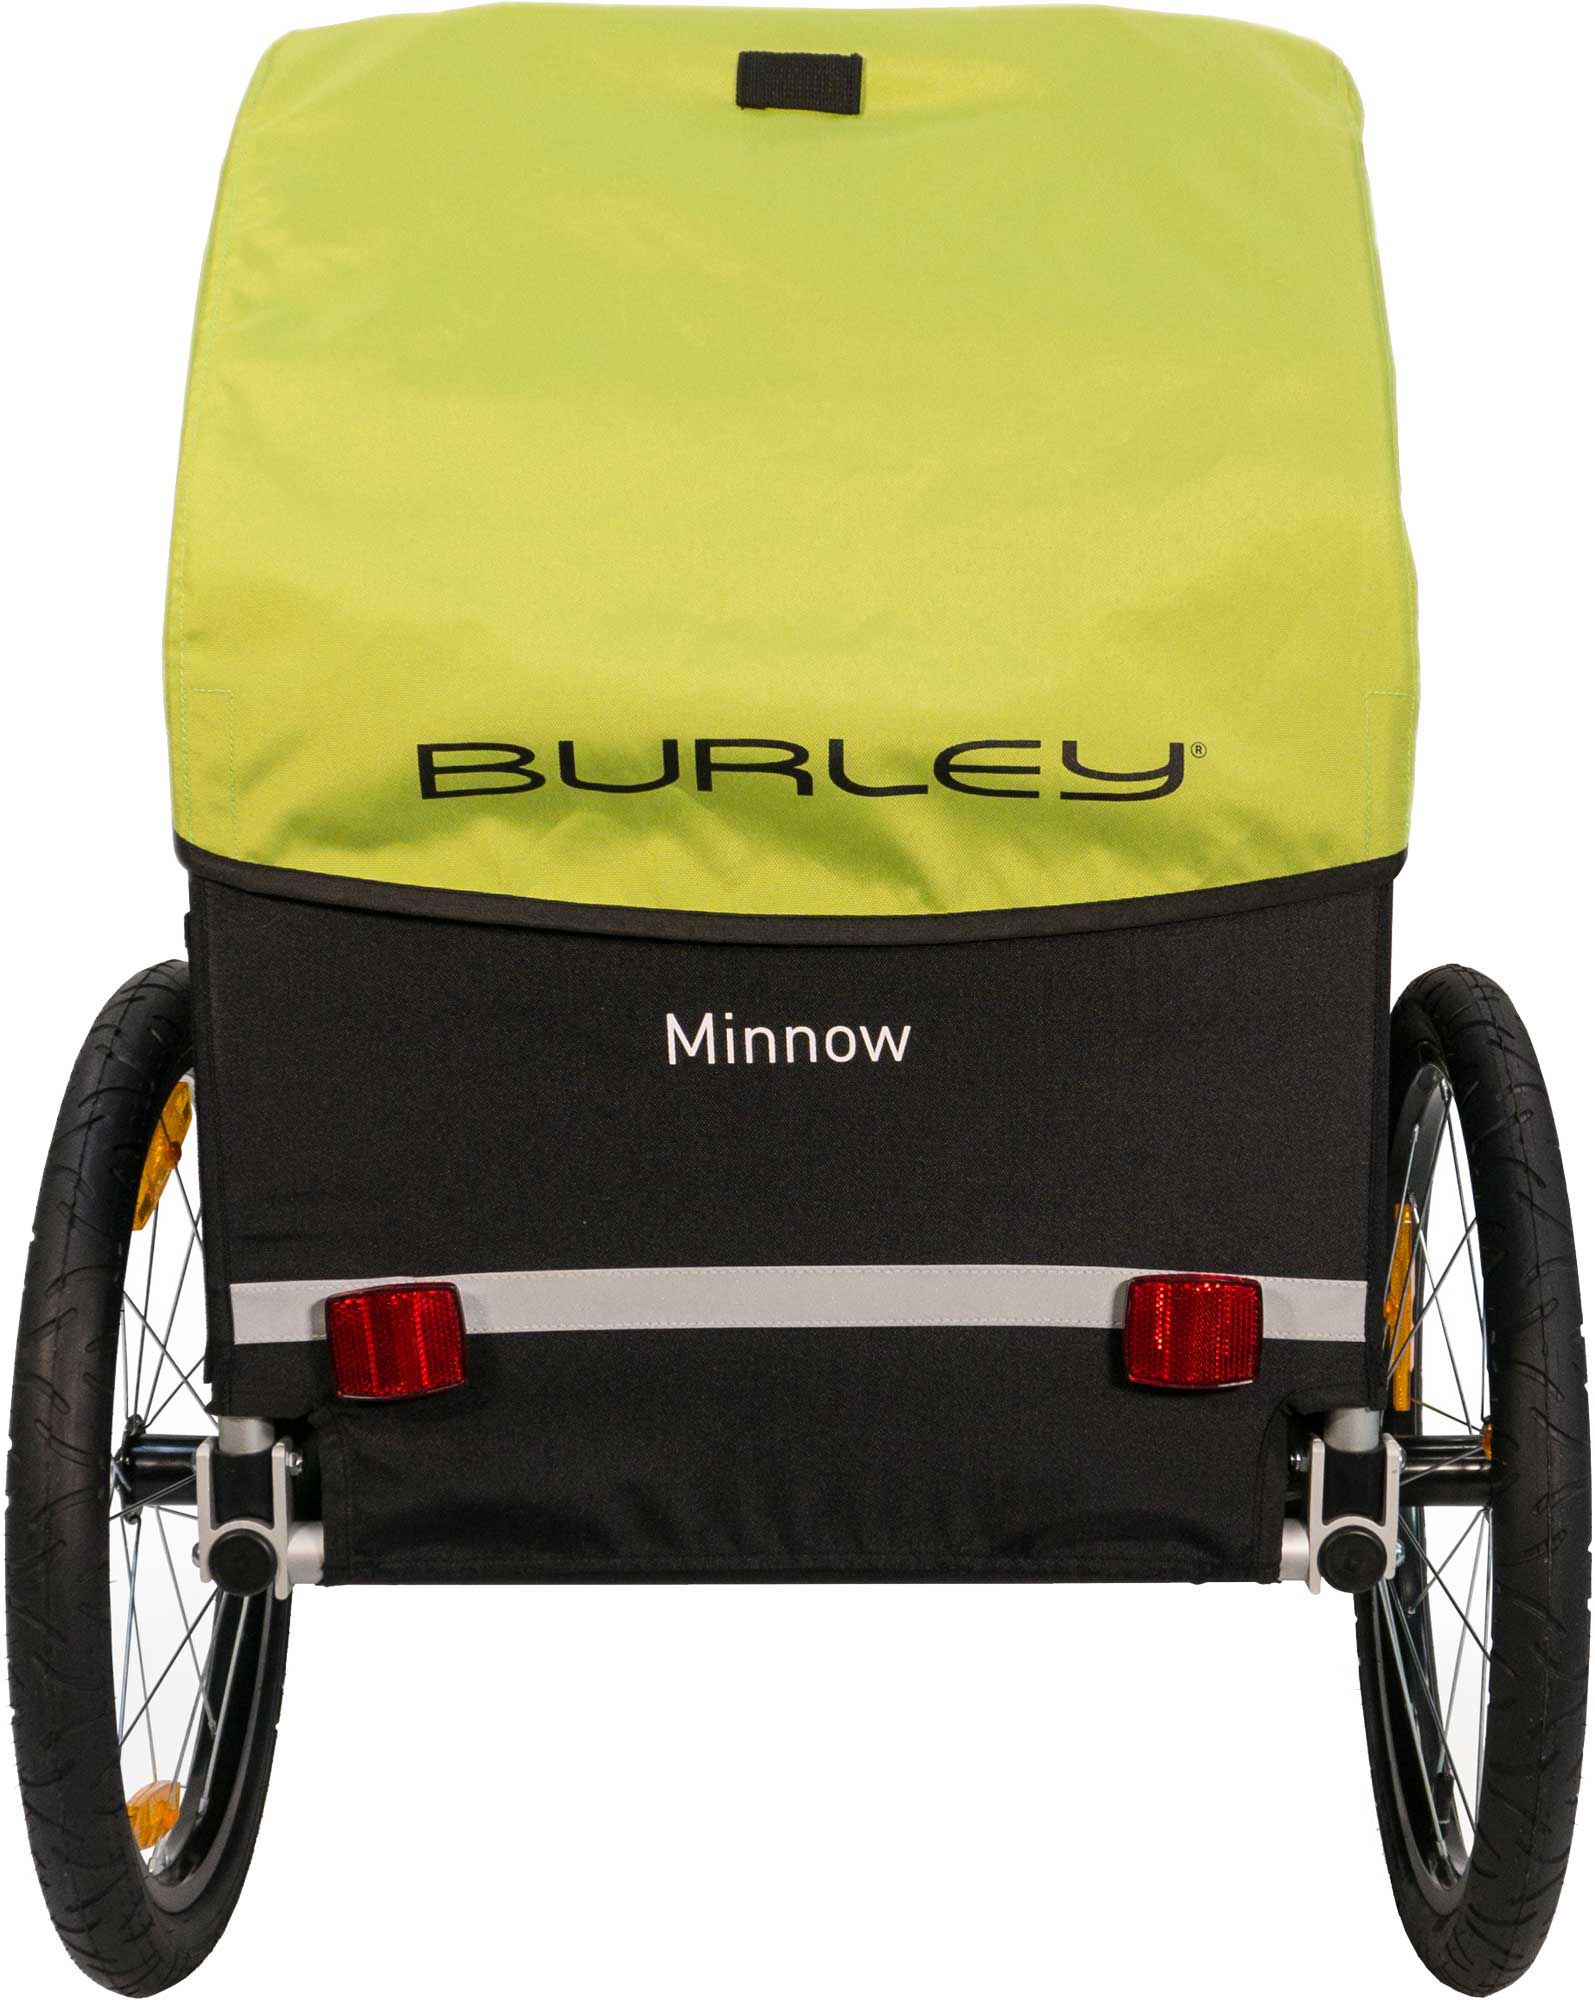 burley minnow review